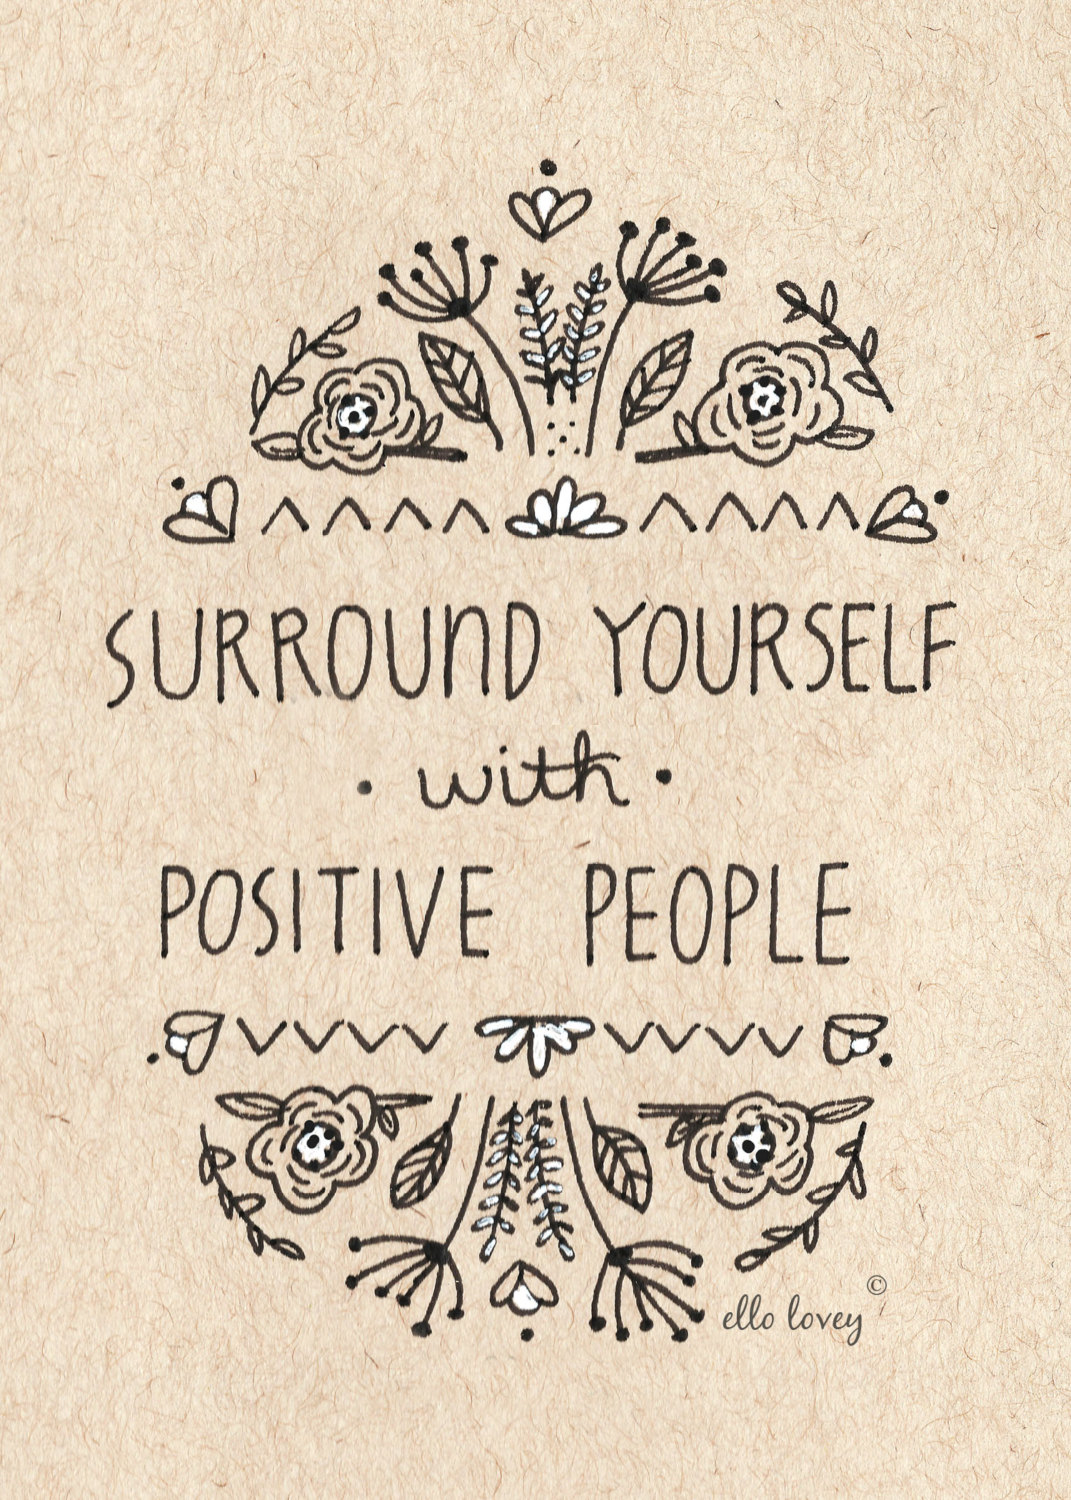 Surround Yourself With Positive People Quotes. QuotesGram